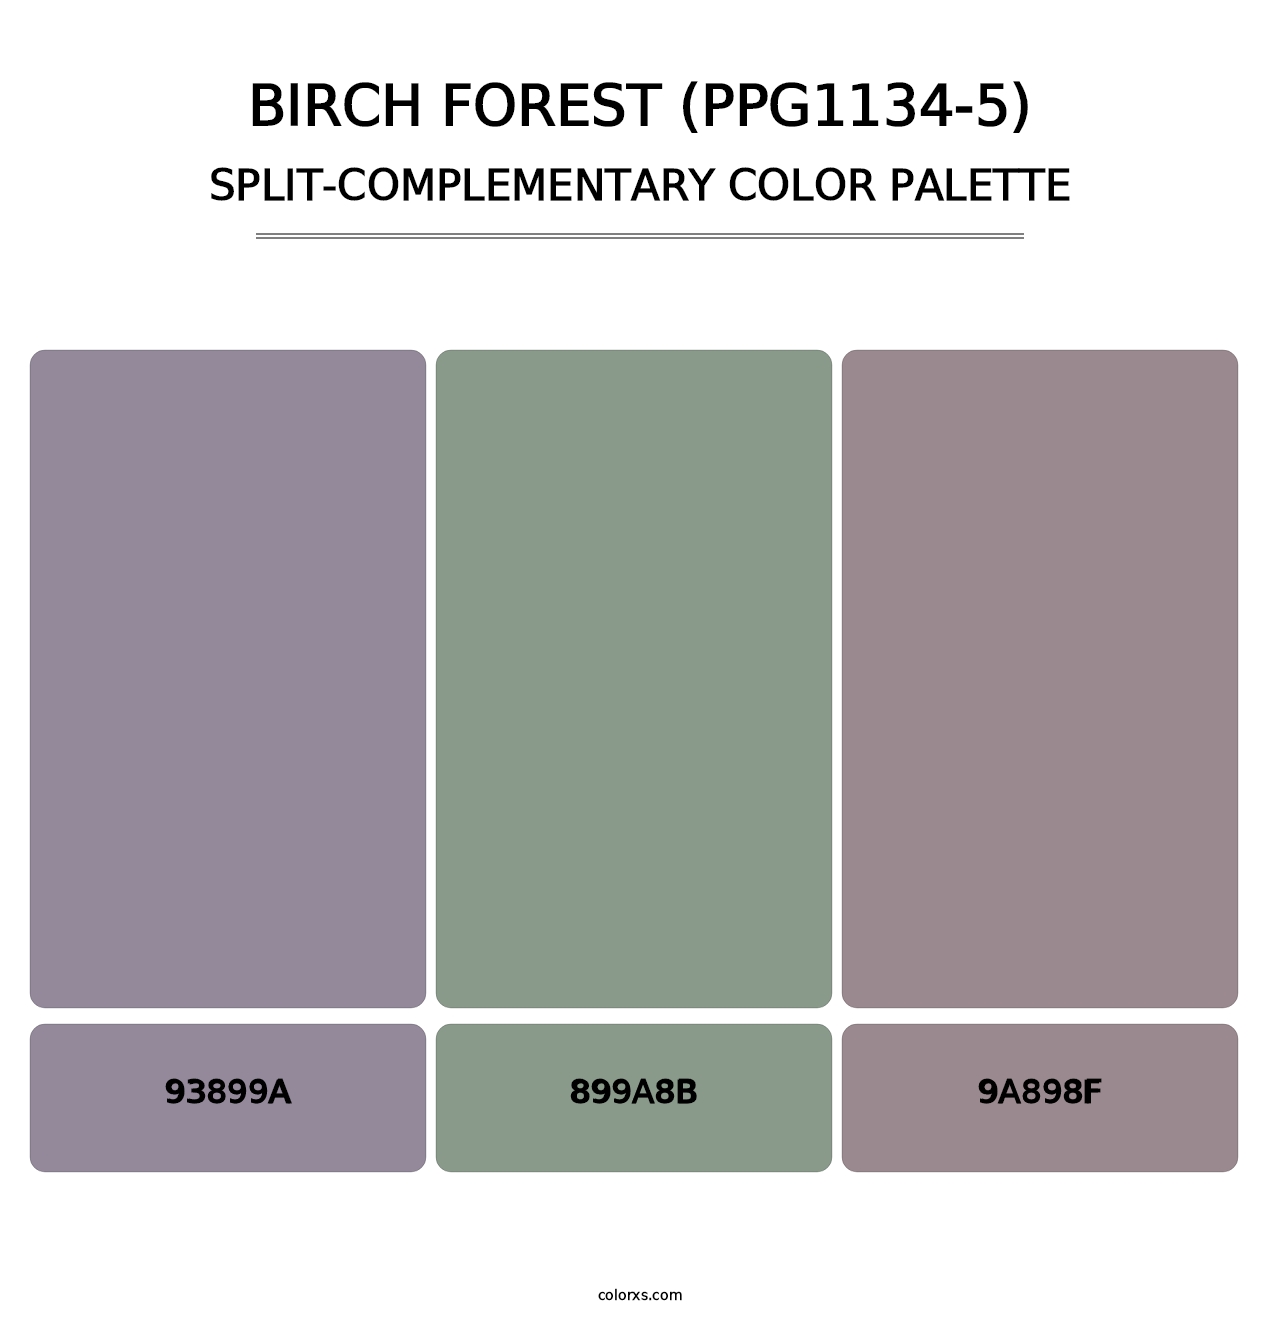 Birch Forest (PPG1134-5) - Split-Complementary Color Palette